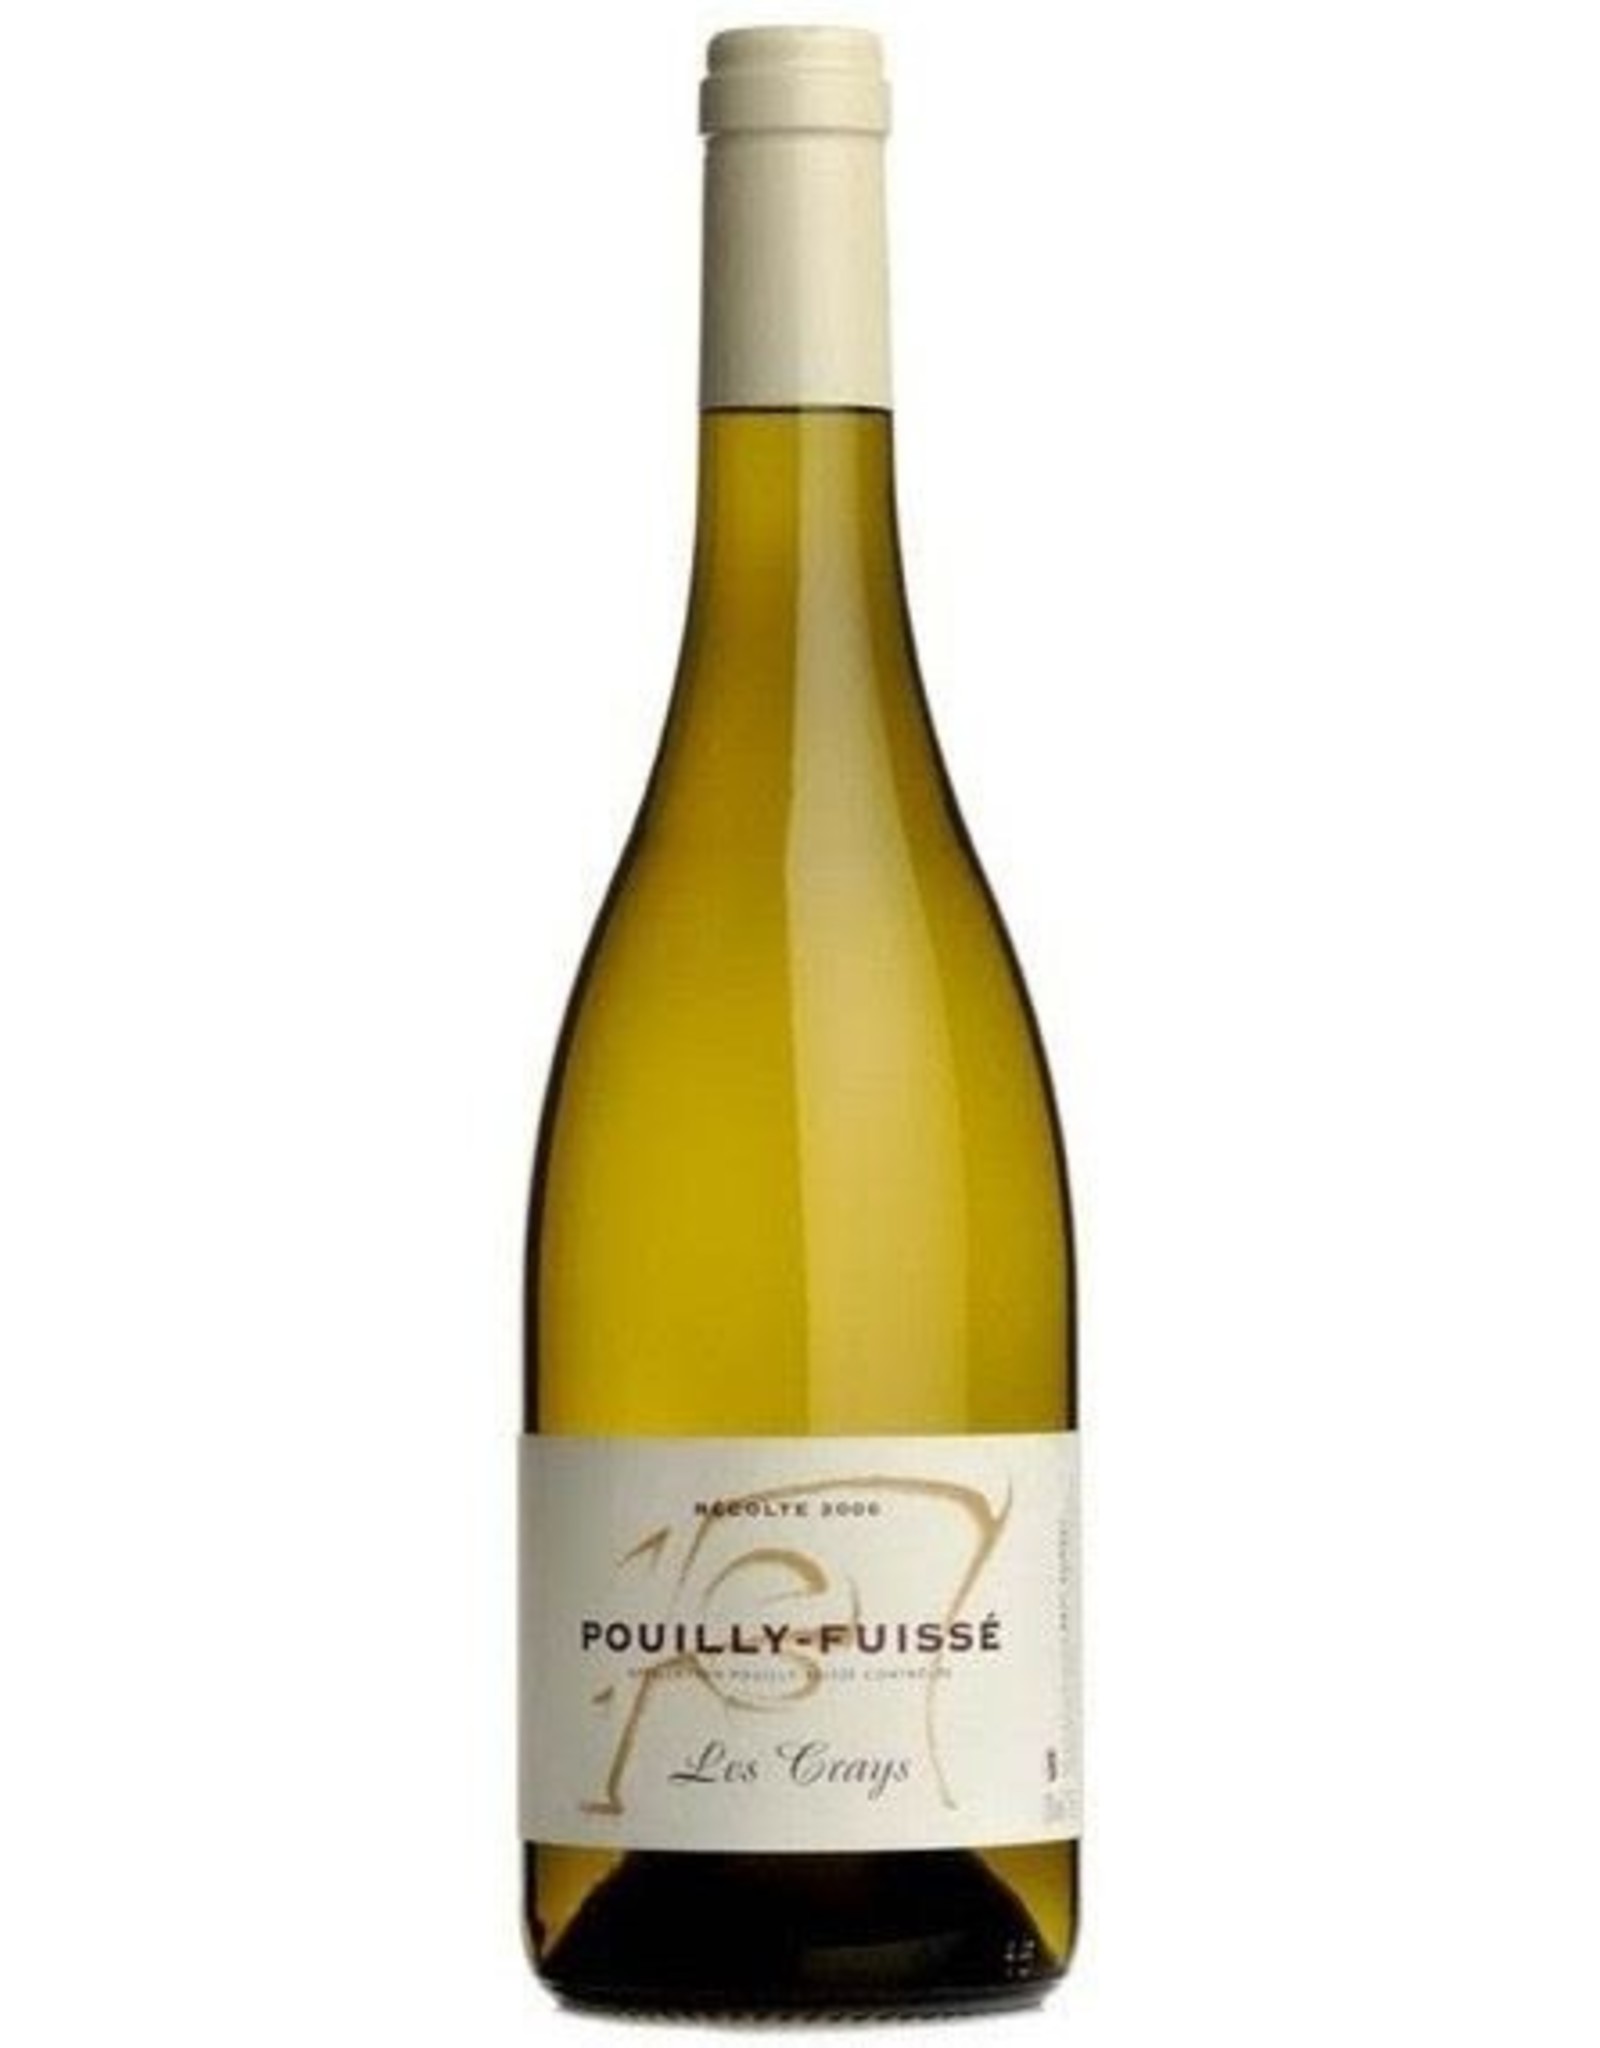 Eric Forest Pouilly Fuisse 'Les Crays' 2019